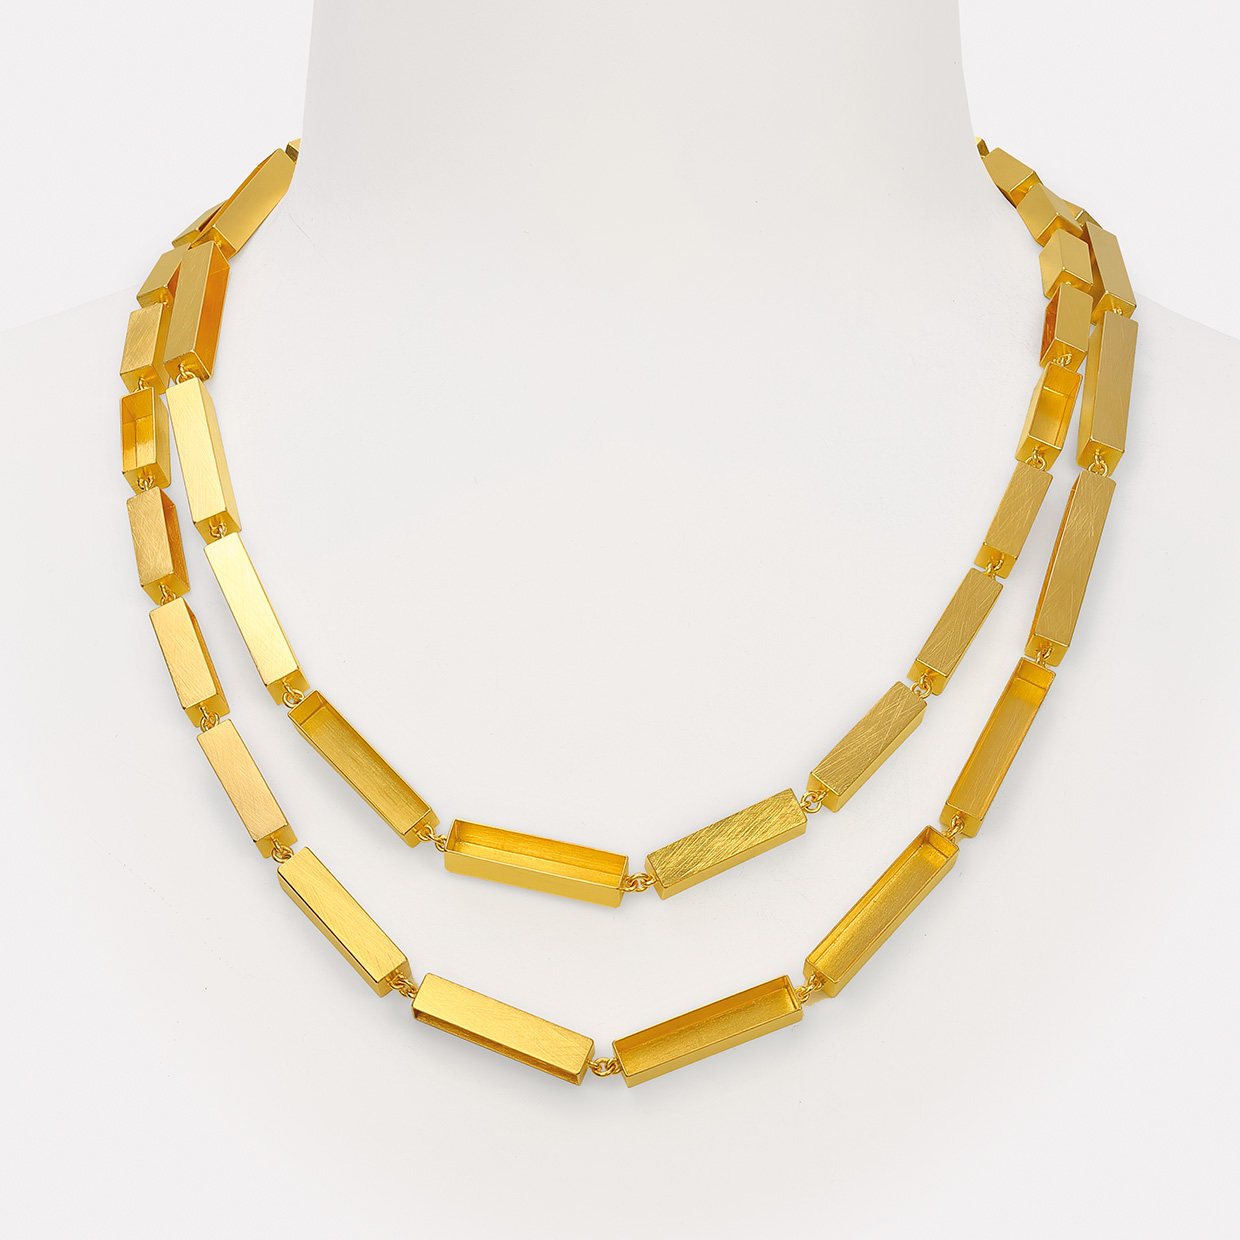 necklace  2020  gold  750  1210x6x6  mm